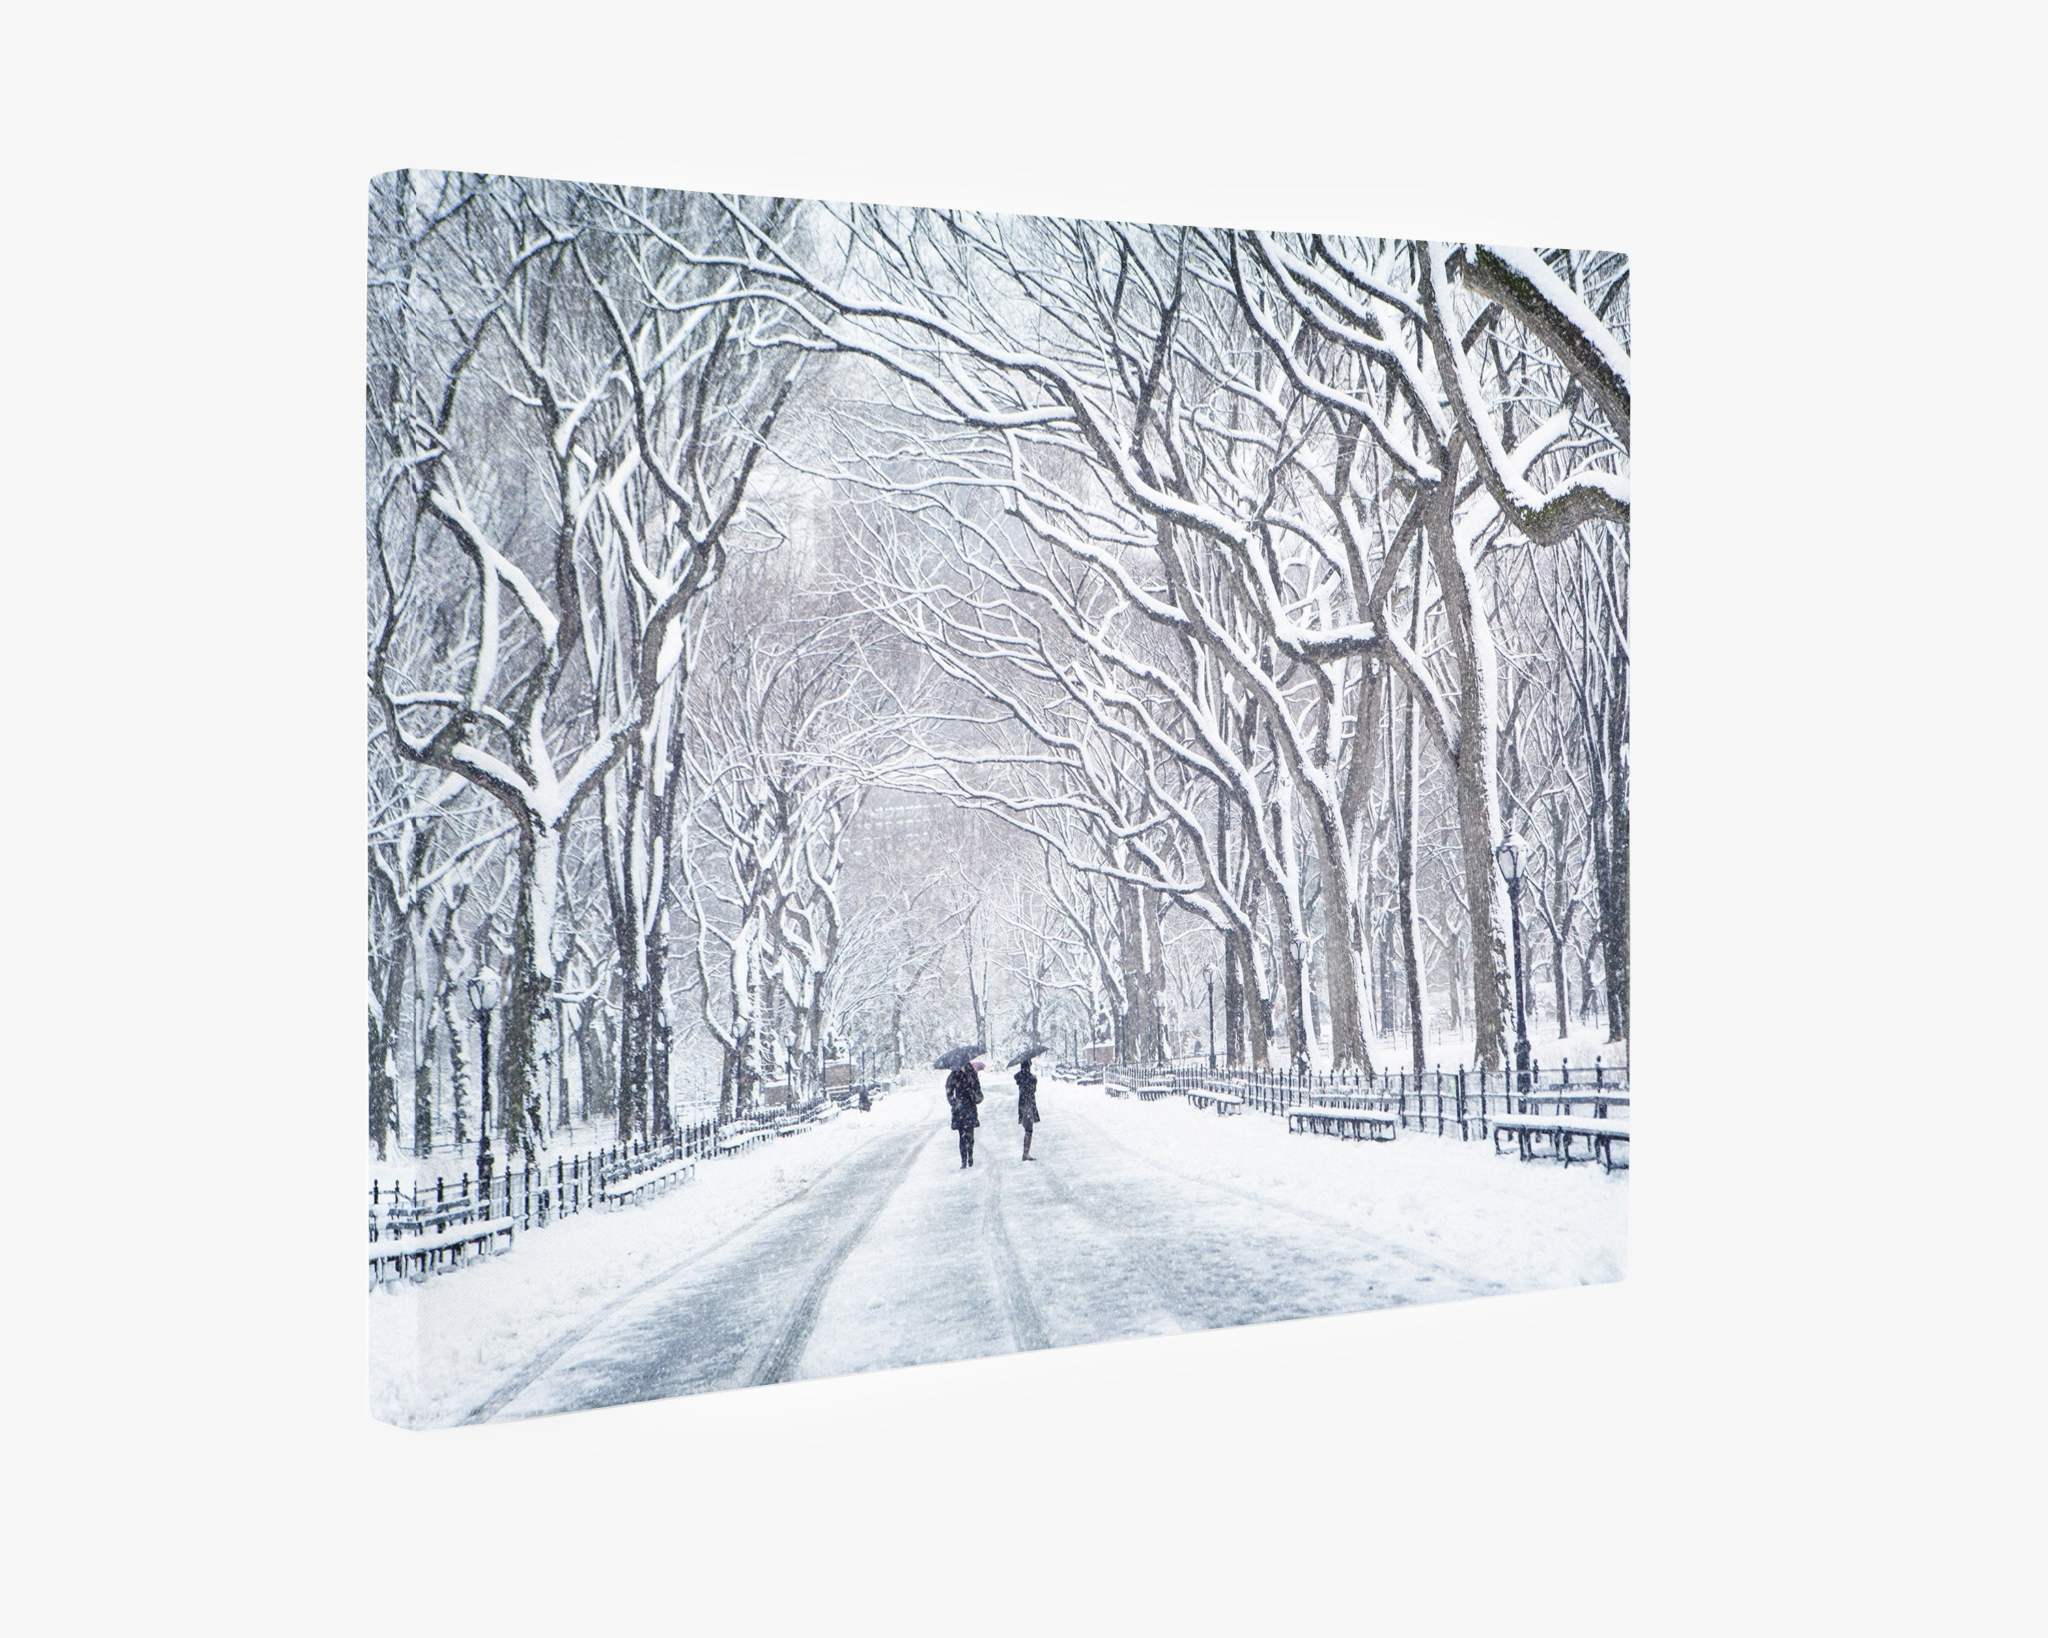 A winter scene depicting a snowy path flanked by leafless trees, captured on premium artist-grade canvas. Two individuals walk in the distance, bundled up against the cold. The branches are covered in fresh snow, creating a serene and quiet atmosphere. This Offley Green ready-to-hang solution, New York Central Park Wall Art, 'The Mall In Winter', adds elegance to any space.